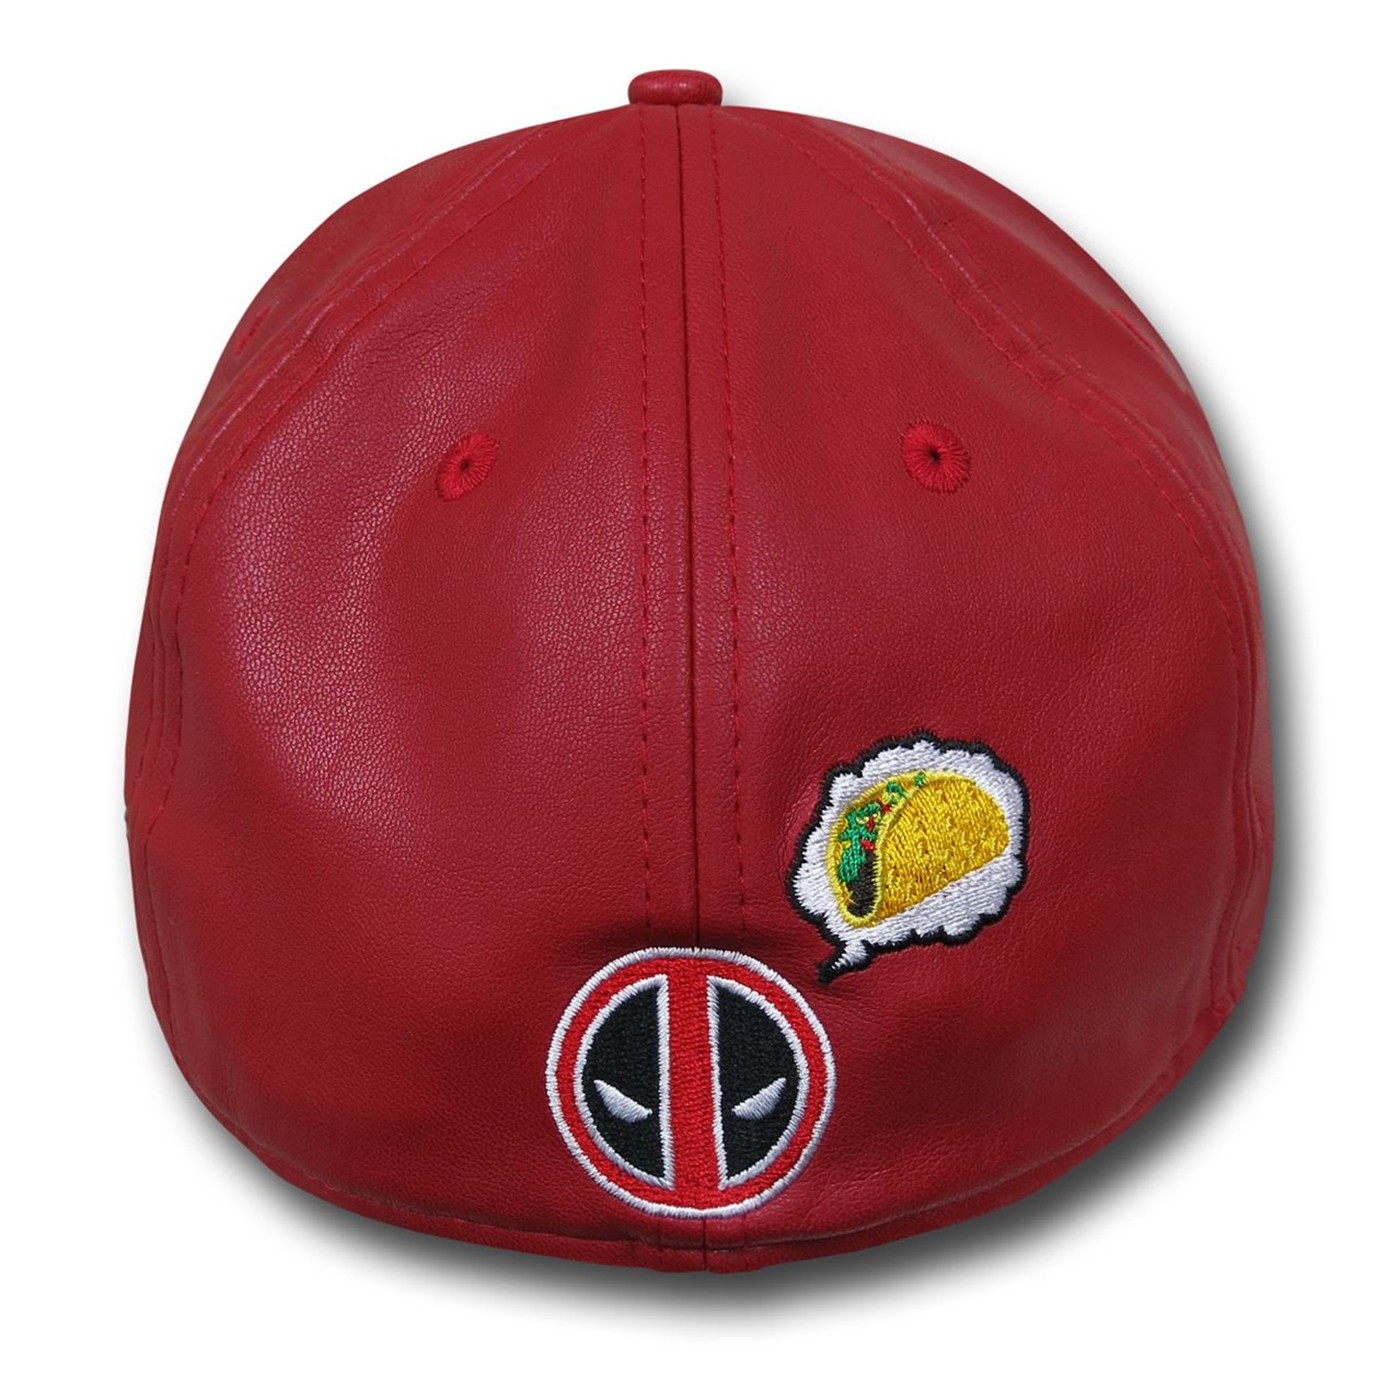 Deadpool Armor New Era 59Fifty Fitted Hat